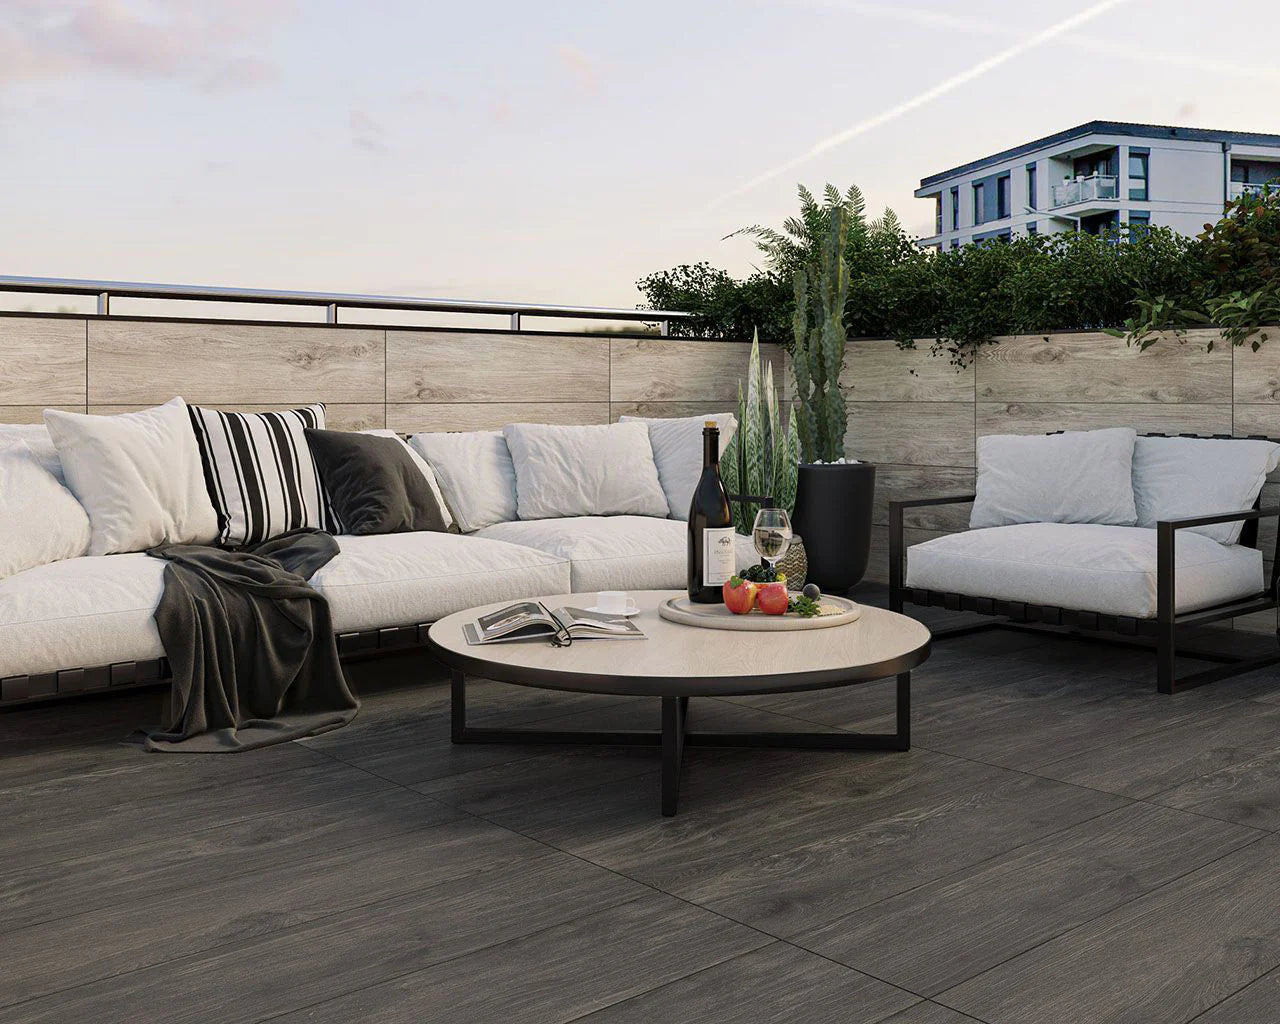 porcelain paving laid with pedestals for paving. Wood effect slabs with outdoor sofa and coffee table